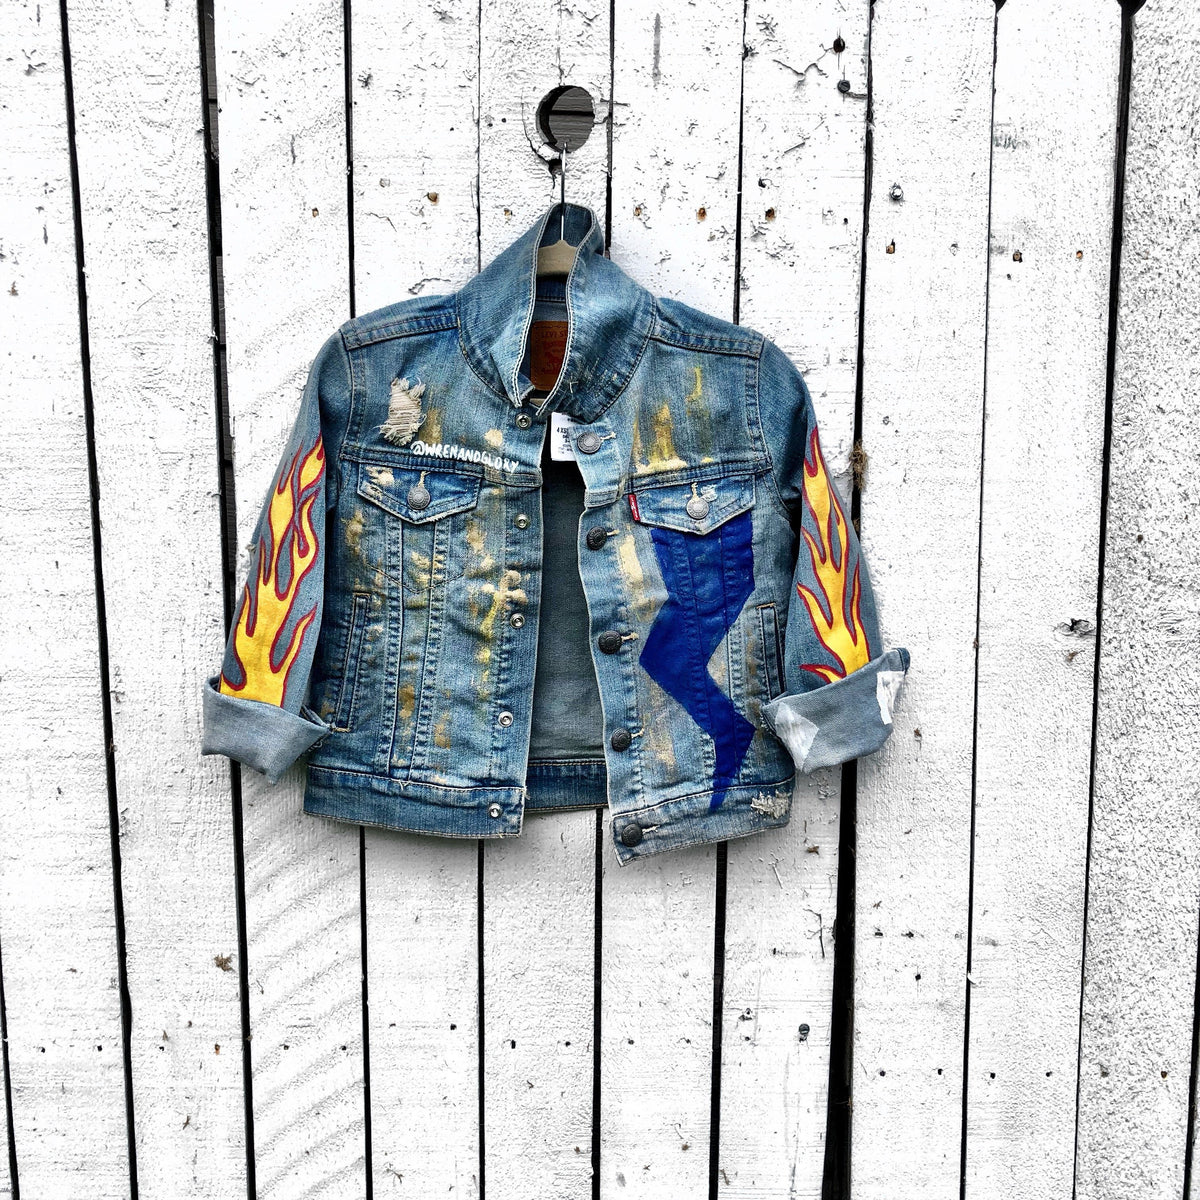 Blue denim jacket. Hand painted design, with stars, flames, and metallics. Childs name available on front, left corner. Each jacket wrapped in a silk wrap bracelet with a child’s charm. Each piece signed @wrenandglory.